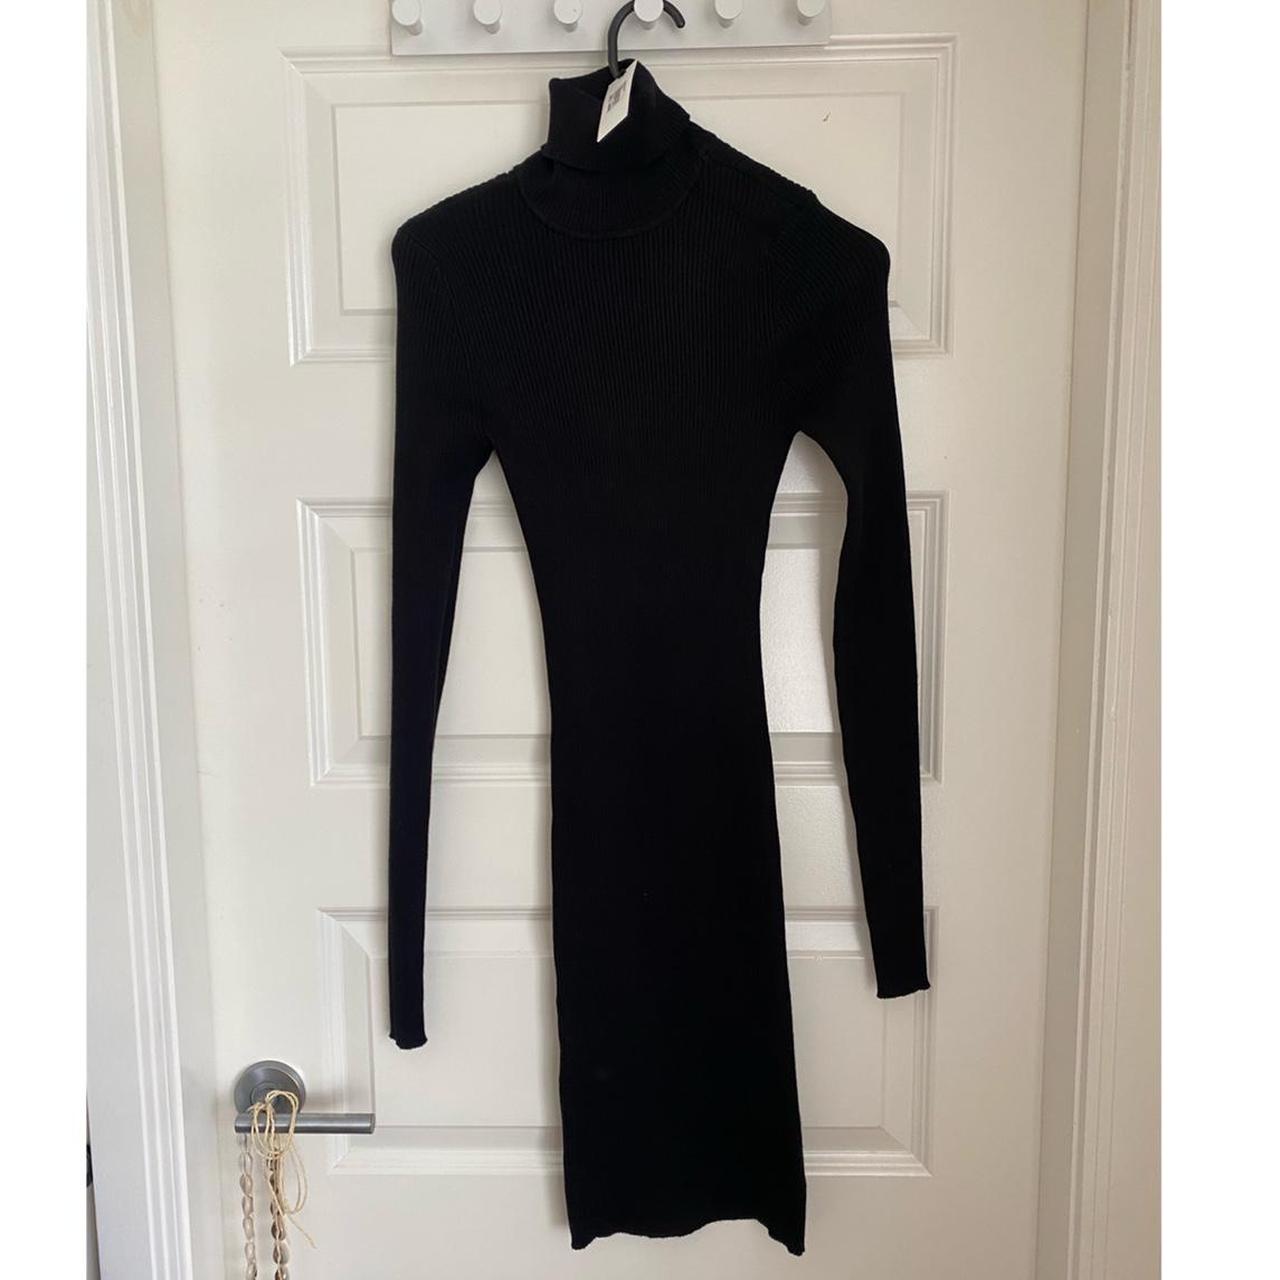 Glassons black Skivvy dress. Size small. New with... - Depop